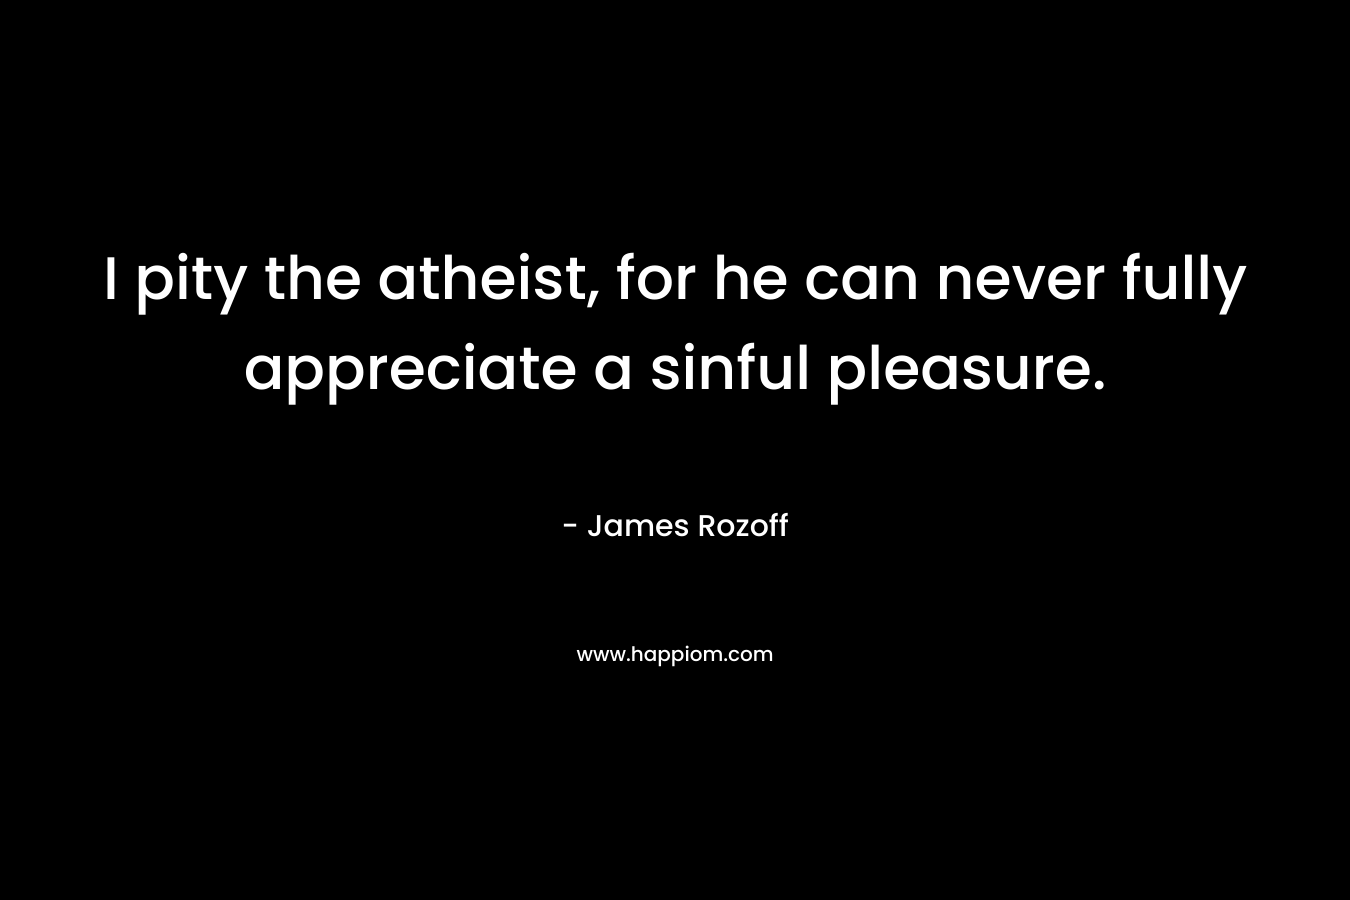 I pity the atheist, for he can never fully appreciate a sinful pleasure. – James Rozoff